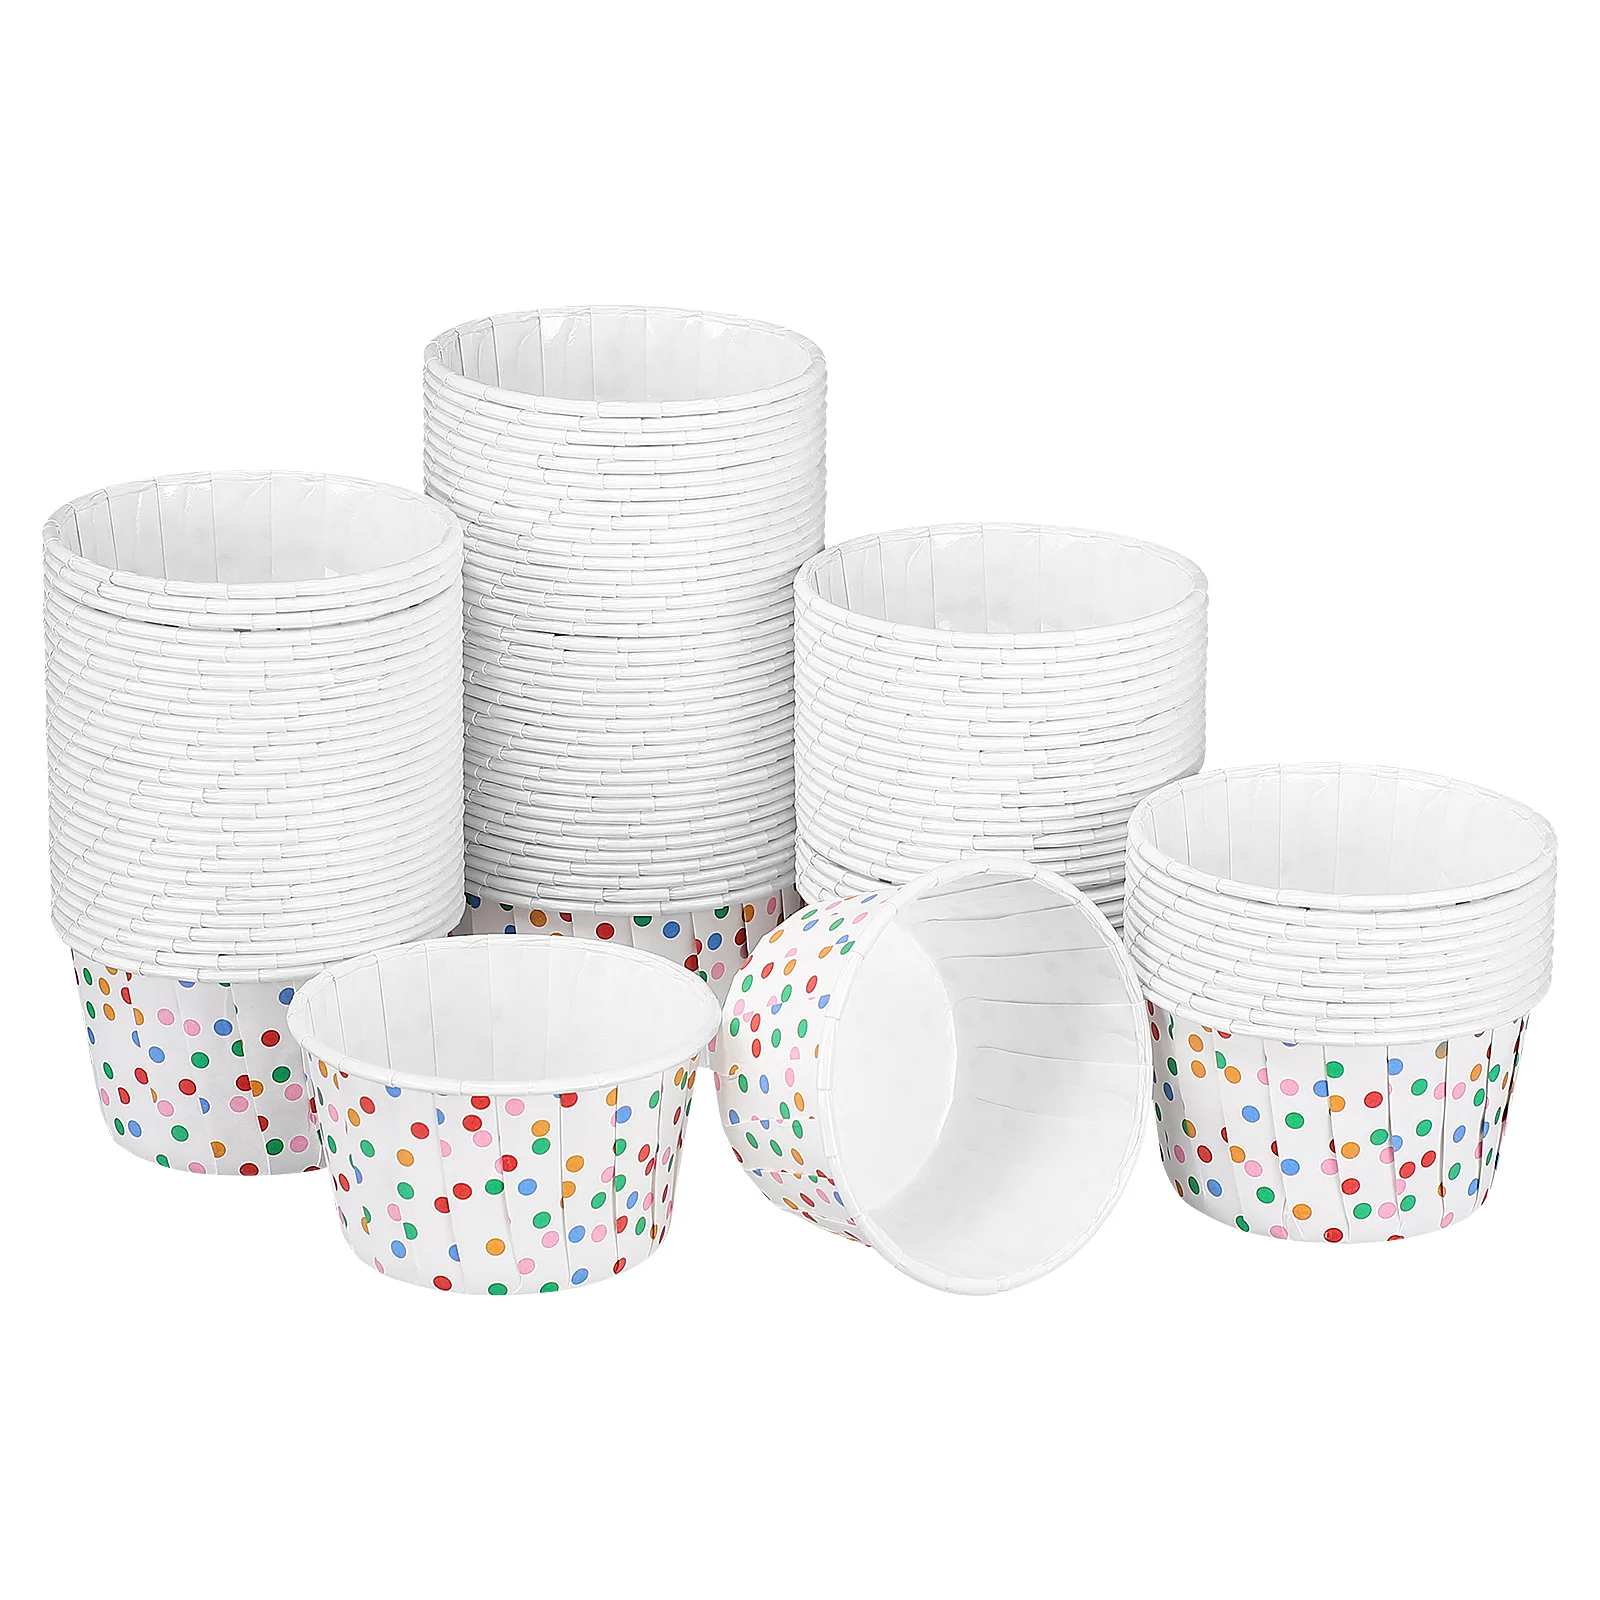 Disposable Underpads Paper Treat Cups Snack Cups Party Ice Cream Cones Yogurt Dessert Bowl